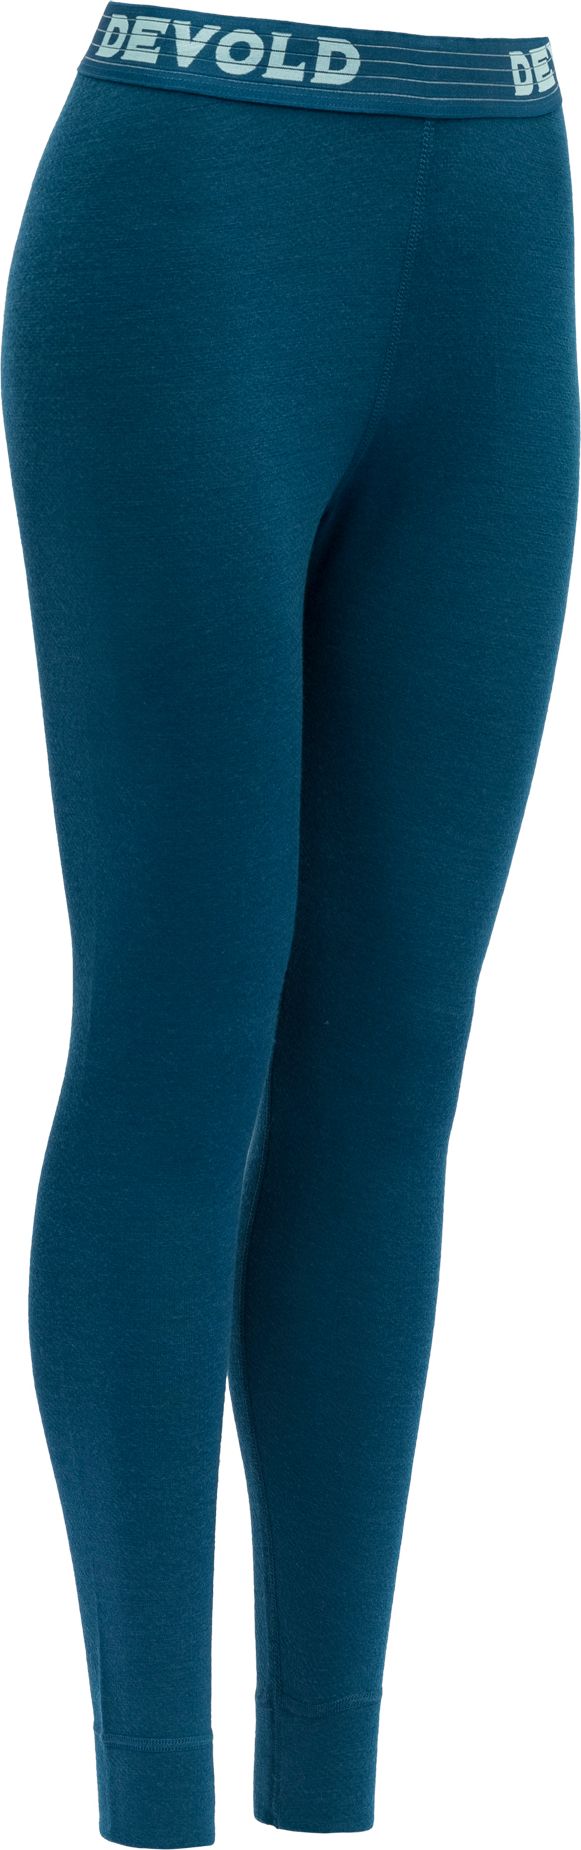 Women's Expedition Long Johns Flood